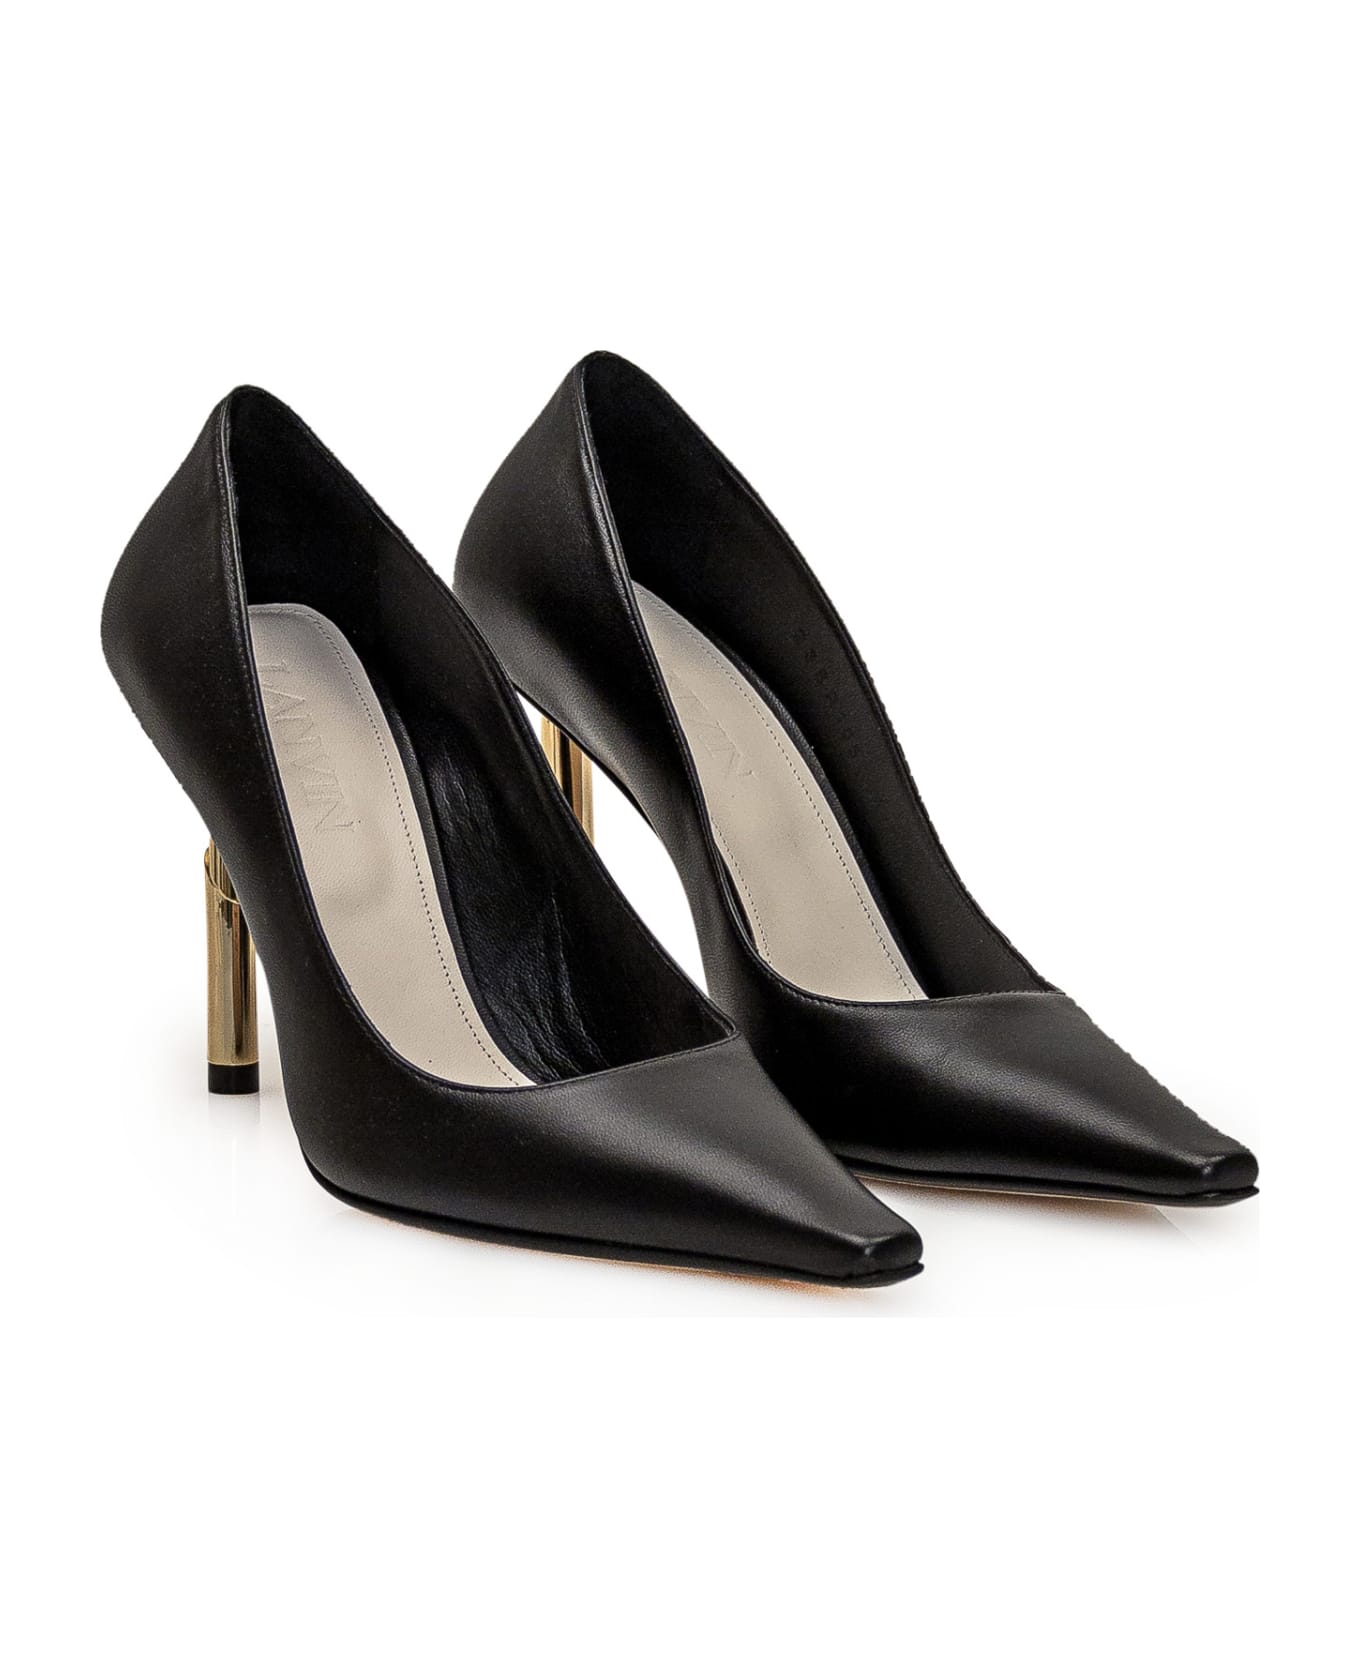 Lanvin Helled Shoe Sequence Pump - BLACK ハイヒール